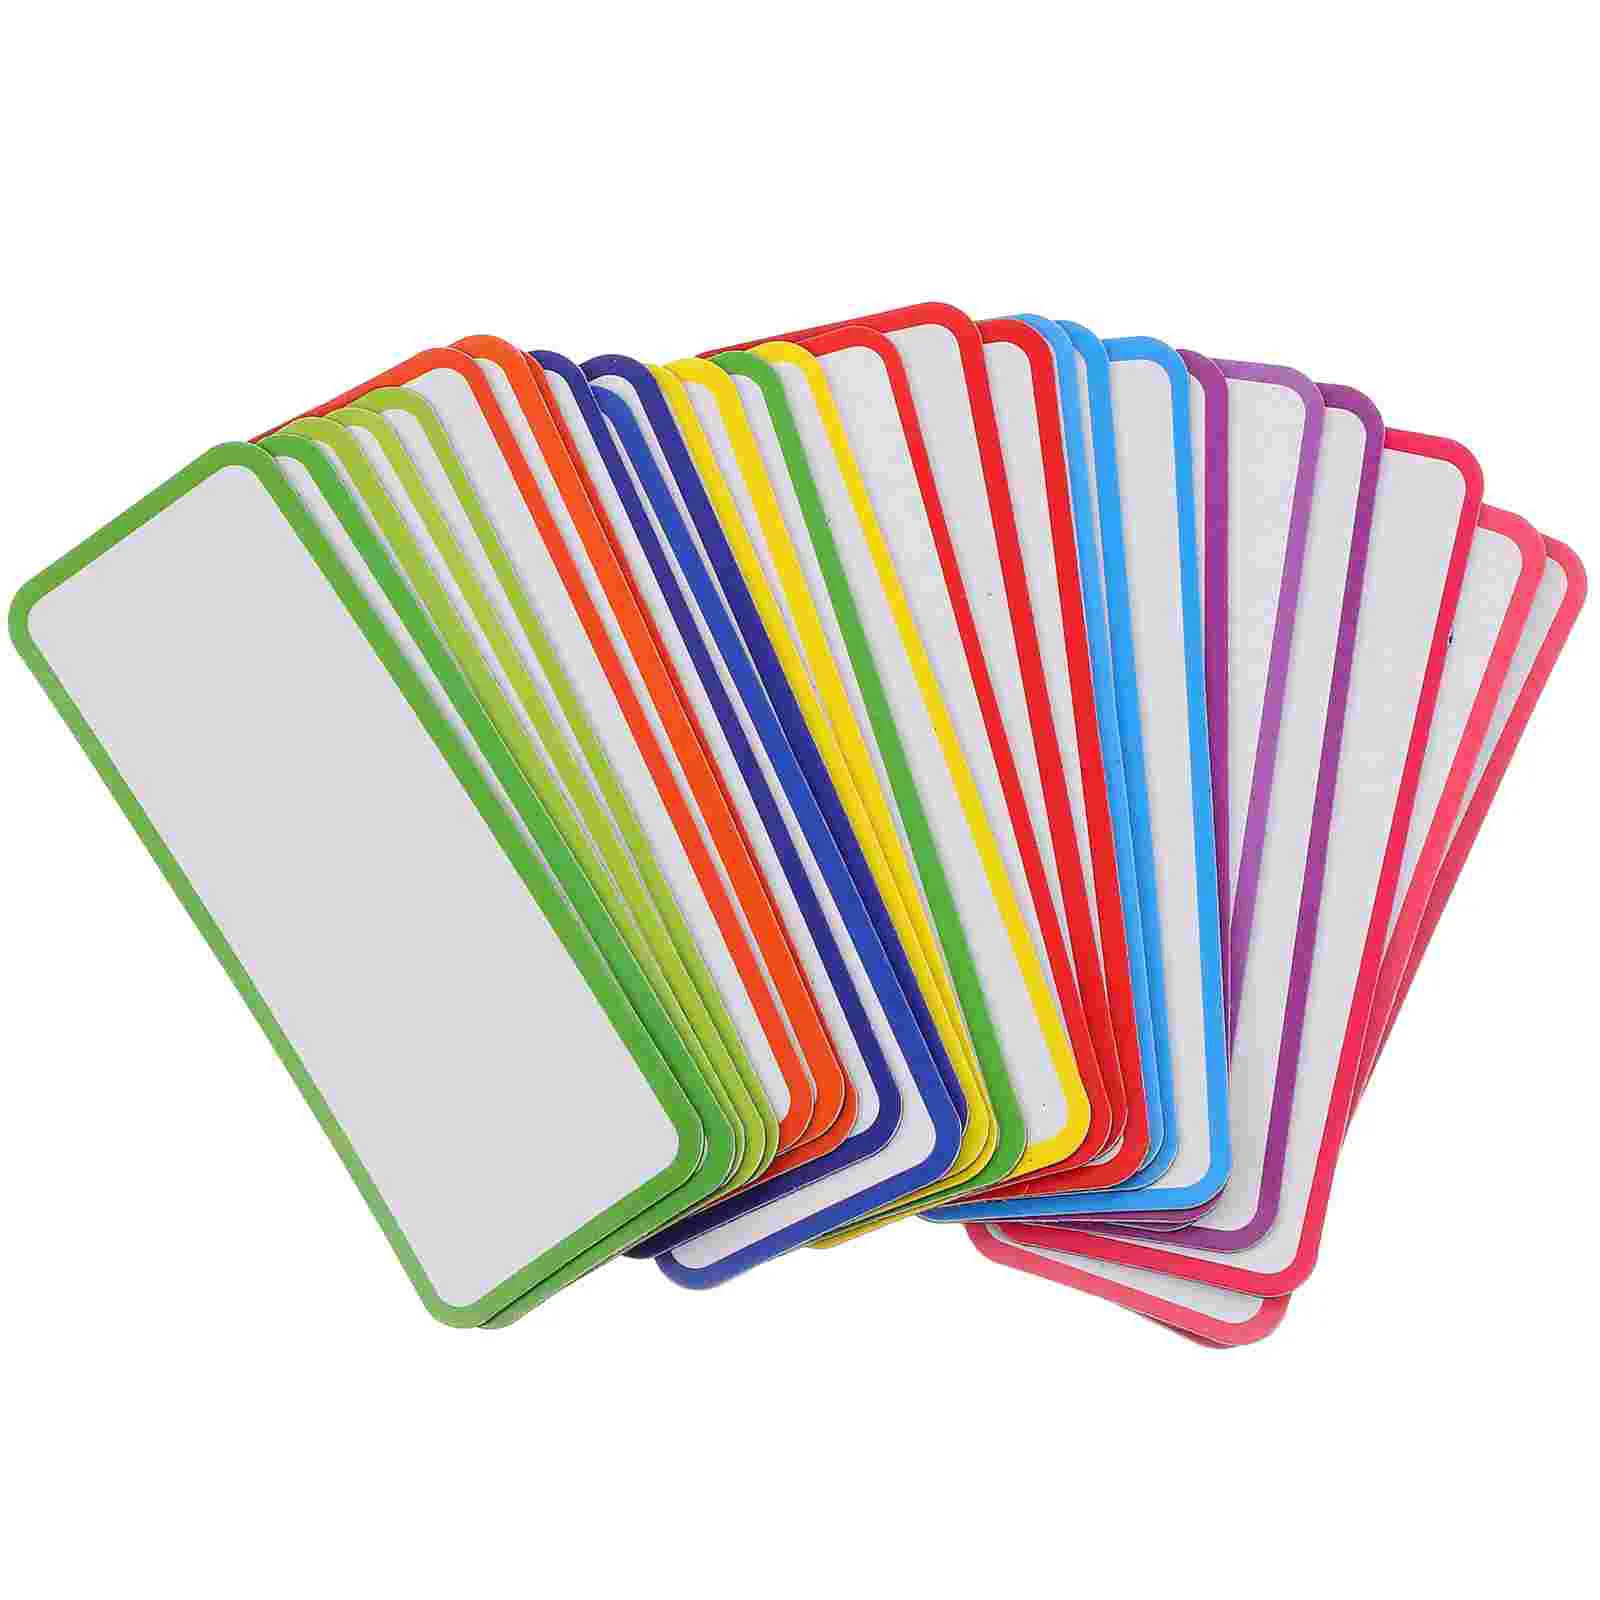 

27pcs Magnet Memo Tags Colored Display Label Stickers for Warehouse Classroom Whiteboard Erasable